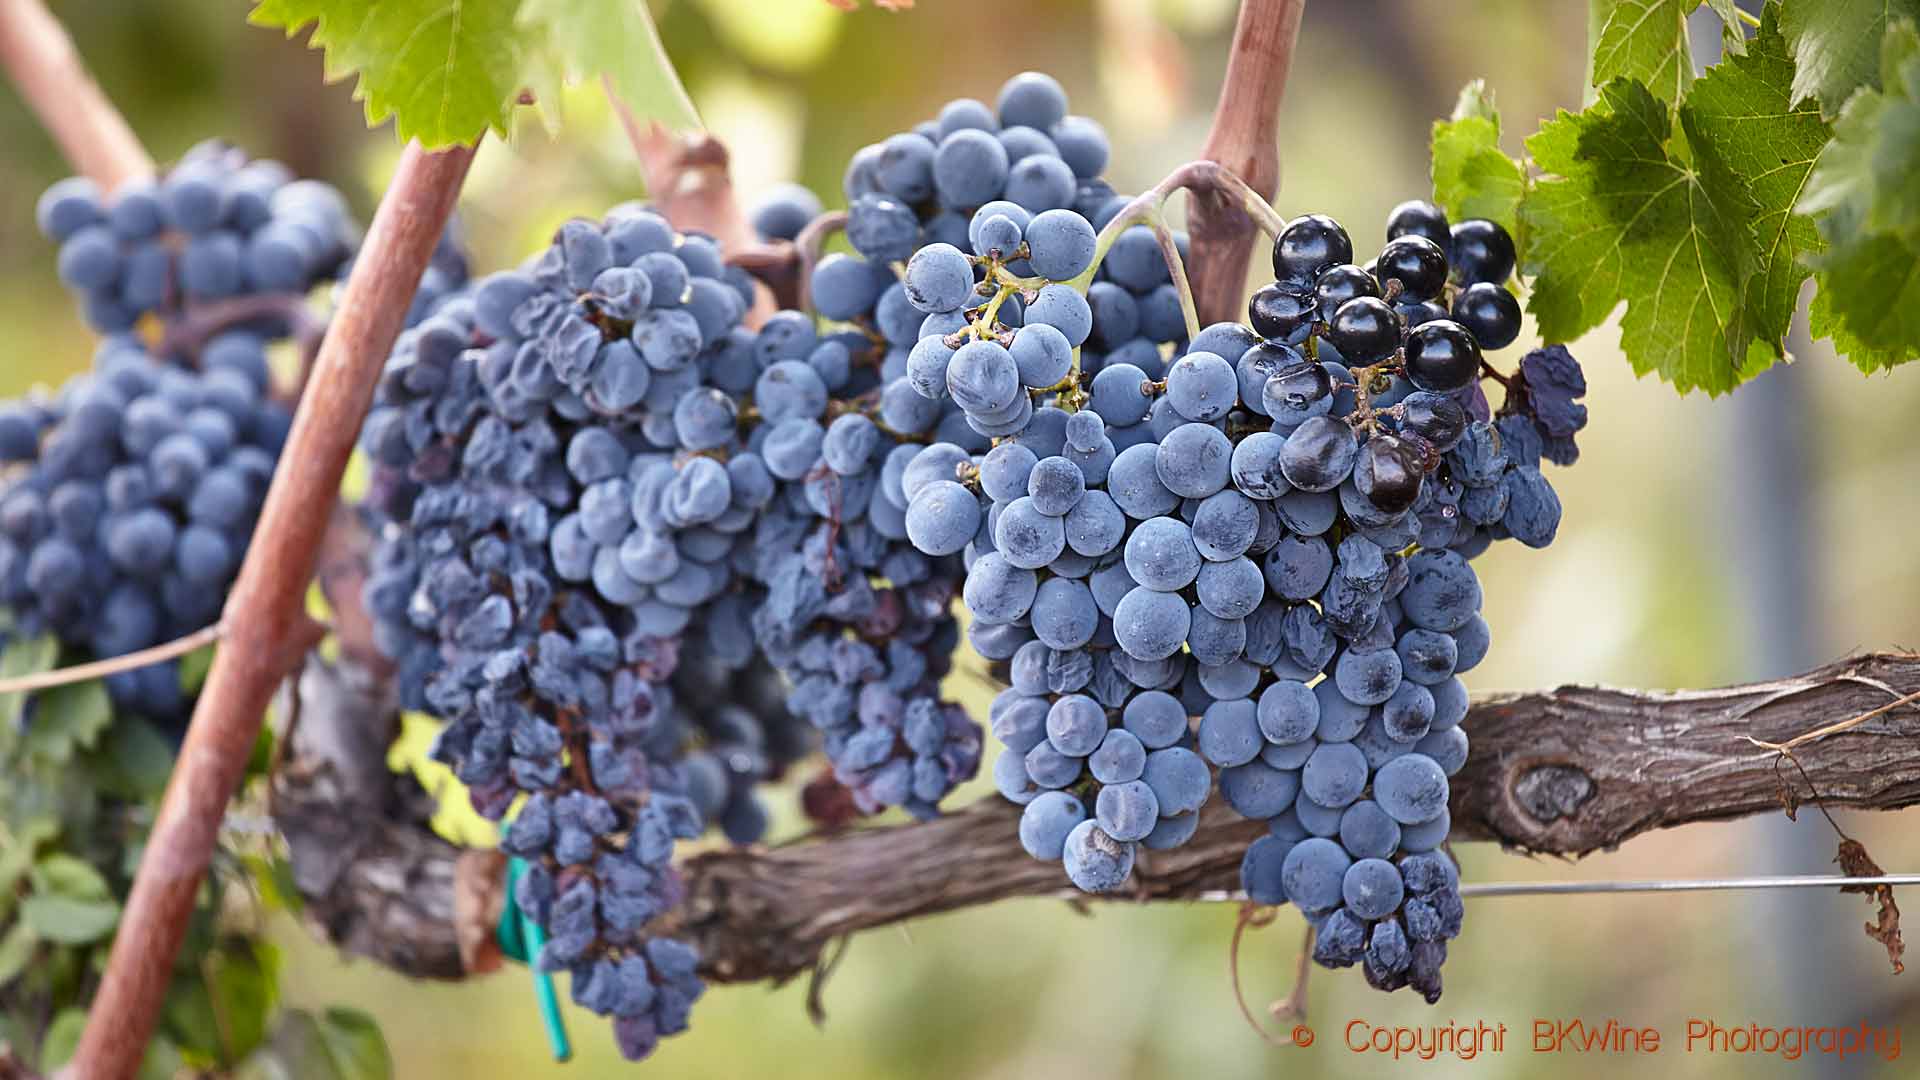 Ripe grapes ready for harvest in a vineyard on Etna, Sicily